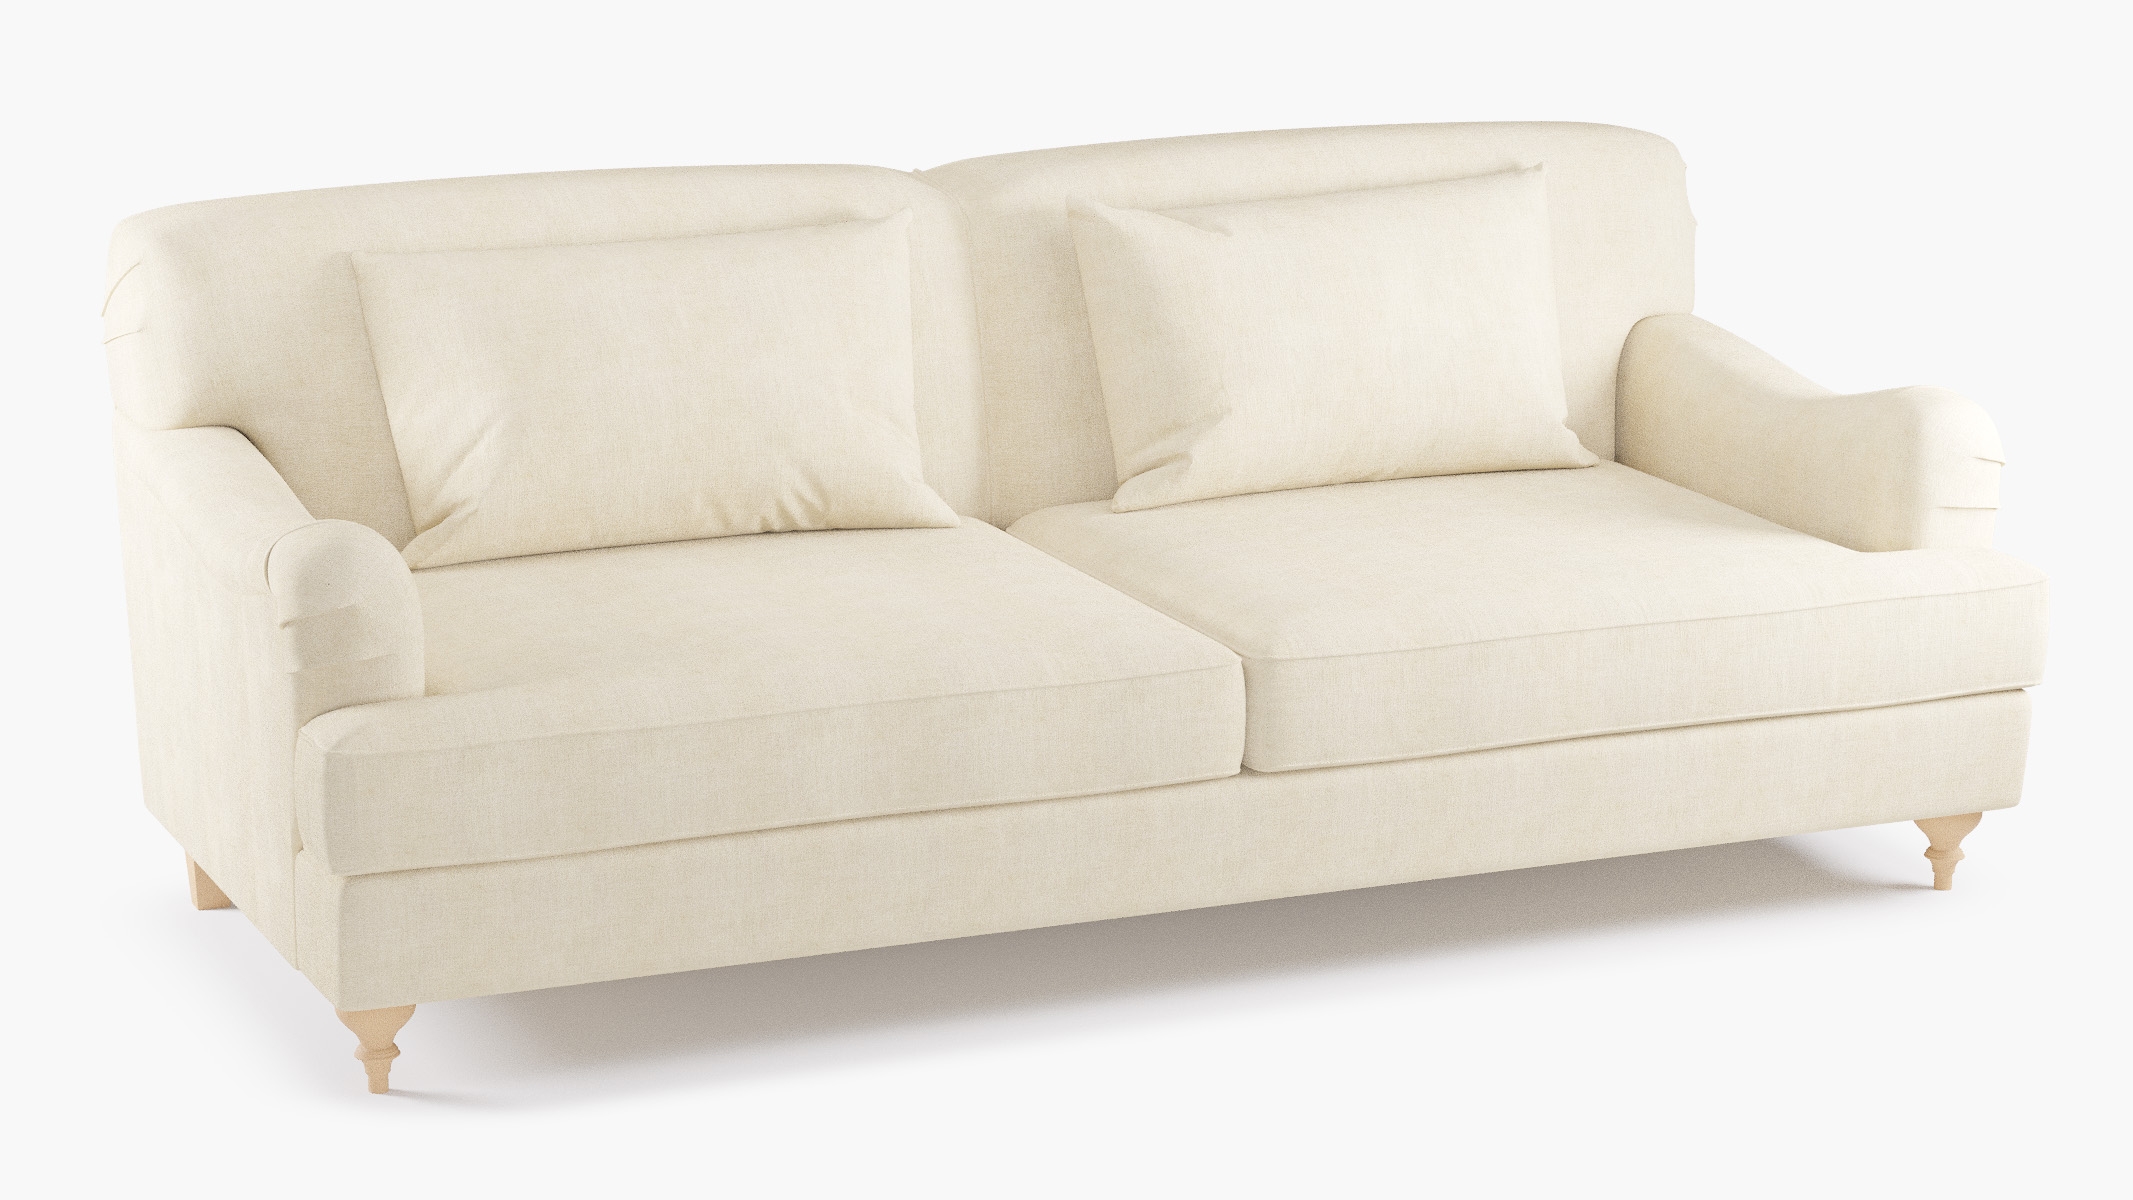 English Roll Arm Sofa, Talc Everyday Linen, Natural - Image 1